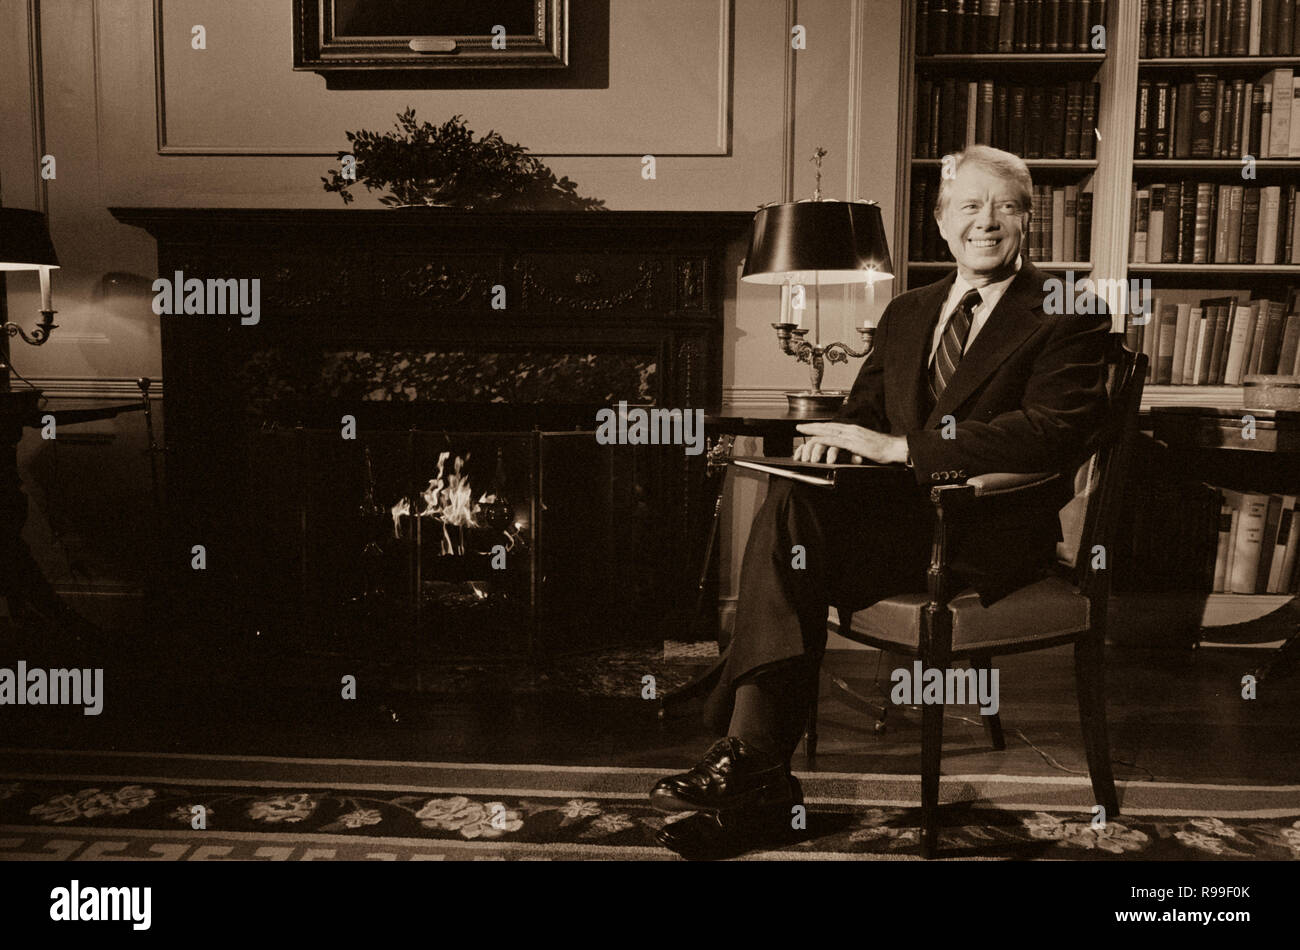 President Jimmy Carter at the White House during a fireside chat on the Panama Canal Treaty, Washington, D.C.. 1978 Feb. 1 Stock Photo